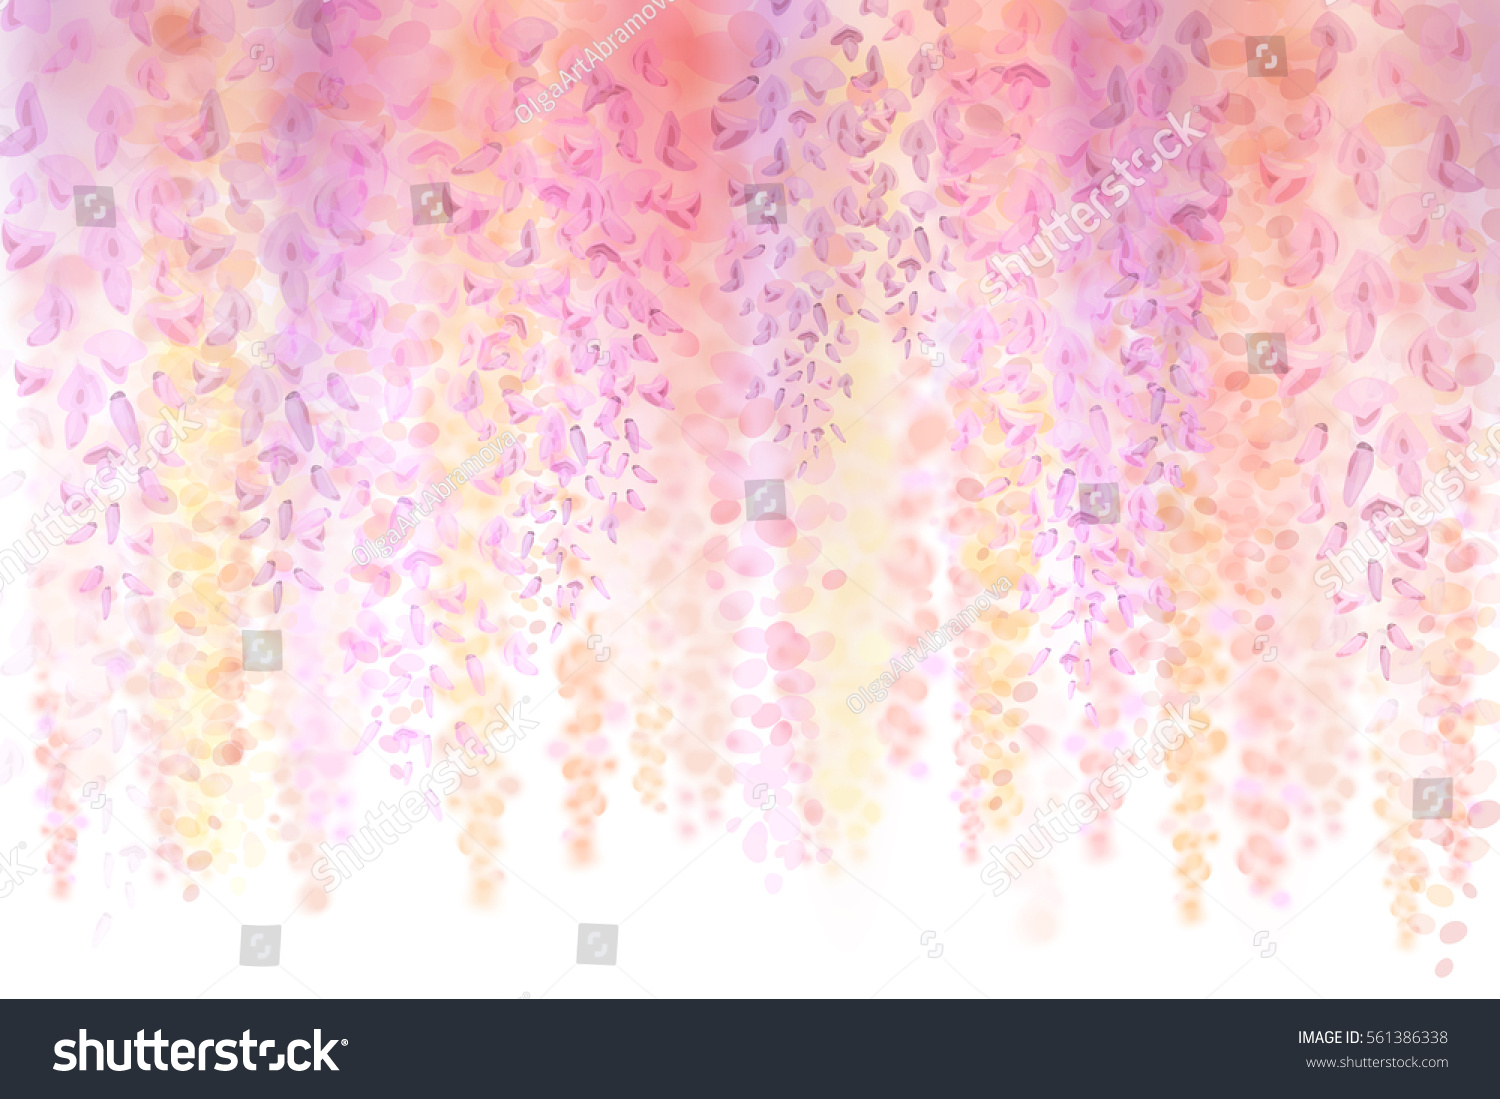 SVG of Spring background with blooming wisteria. Gentle watercolor spring flowers on a white background. Can be used for wallpaper, wedding invitations, greeting cards for birthday, valentine's day. svg